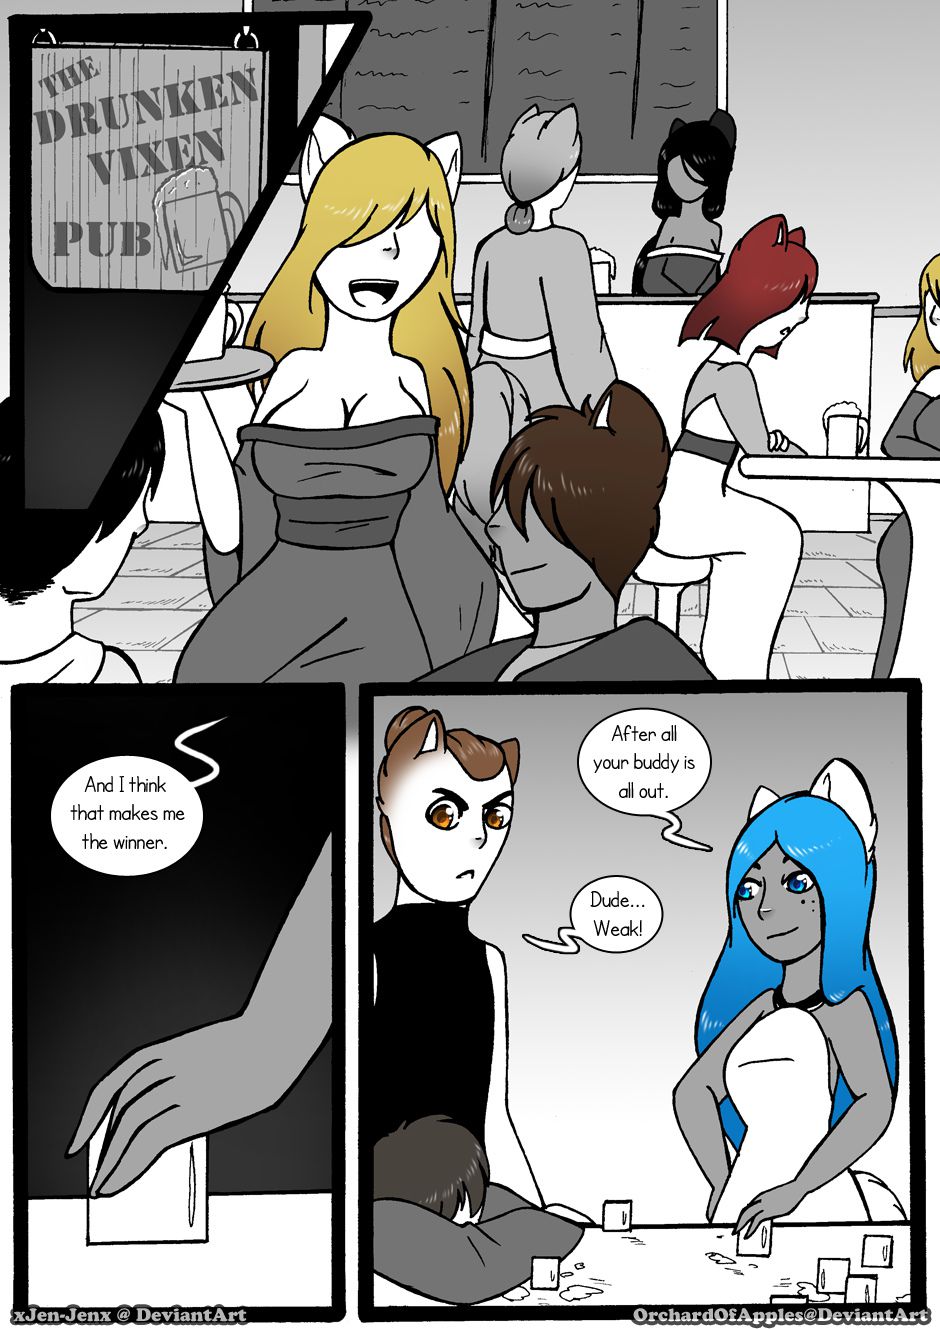 [Jeny-jen94] Between Kings and Queens [Ongoing] 133